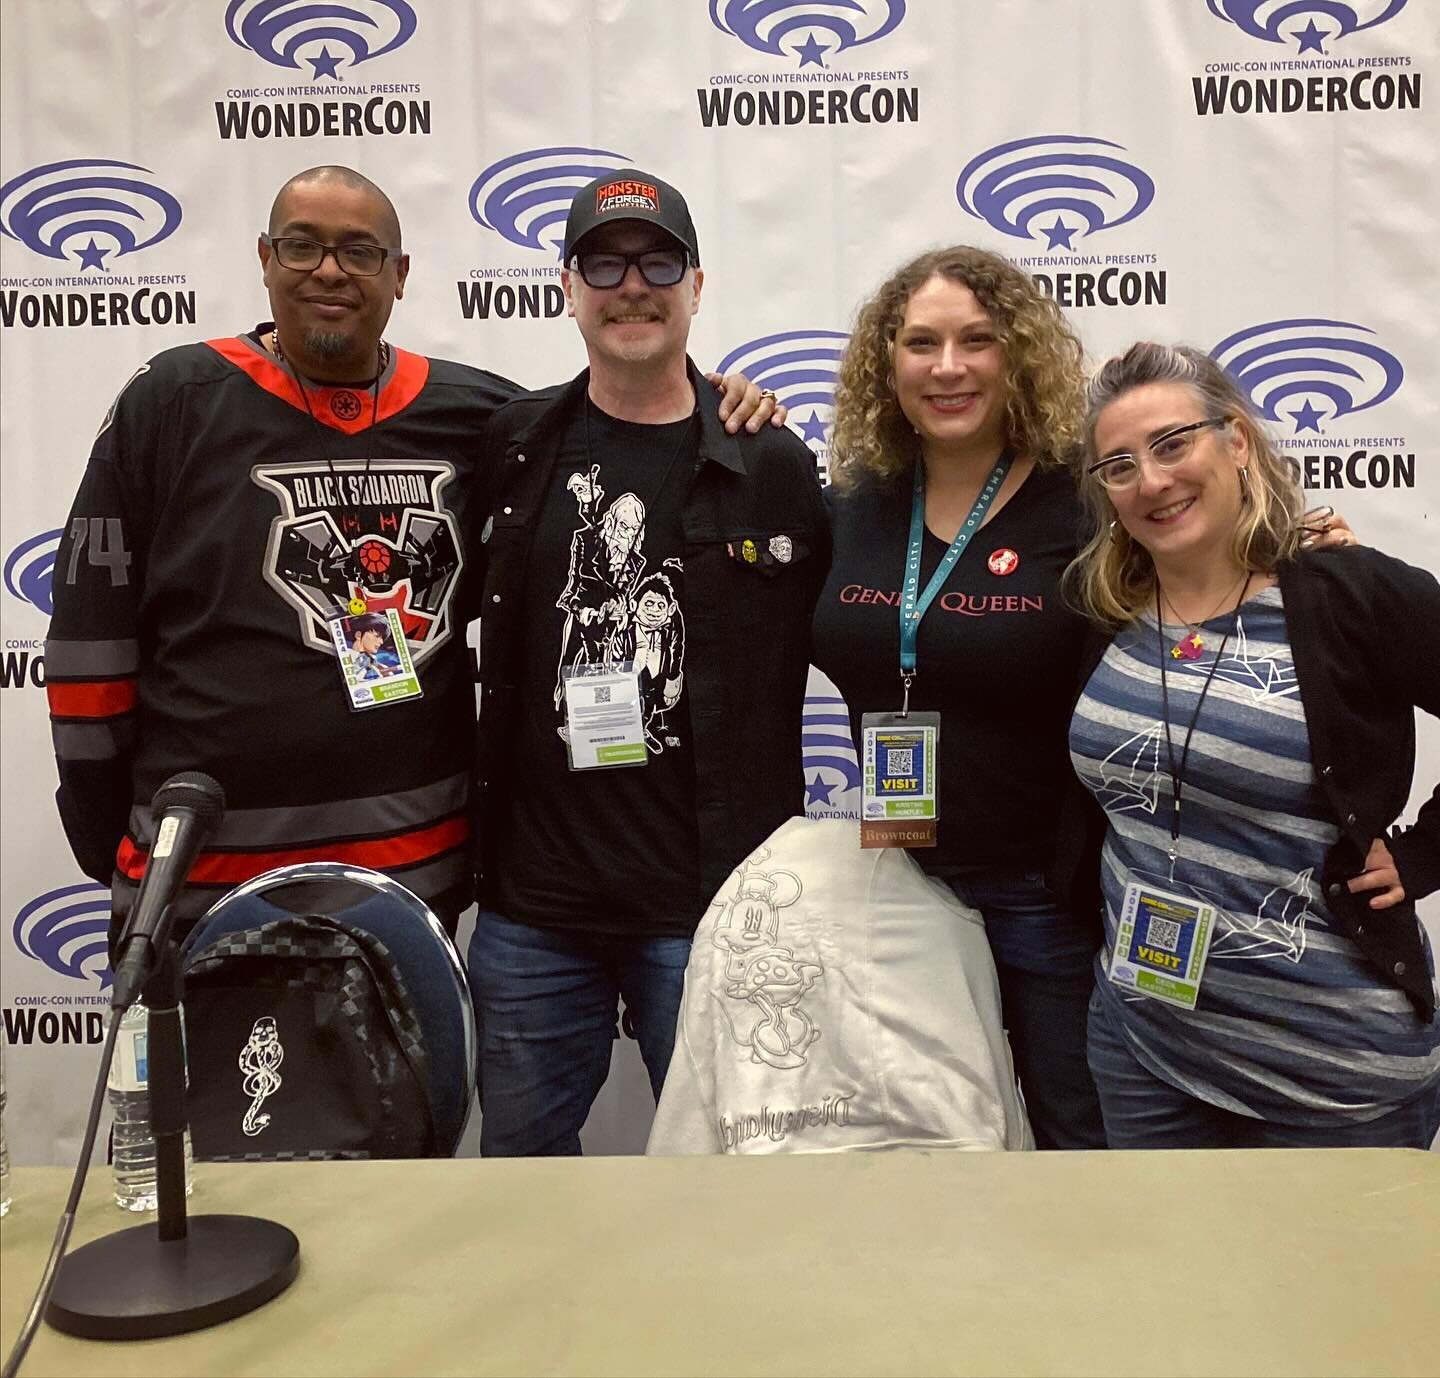 A great day two @wondercon  with amazing panels with @brandoneastonwriter @shannonericdenton @kristine.huntley @thatdistantfire @rhymeswithcapri  Nat Yonce and Daniel Jun Kim